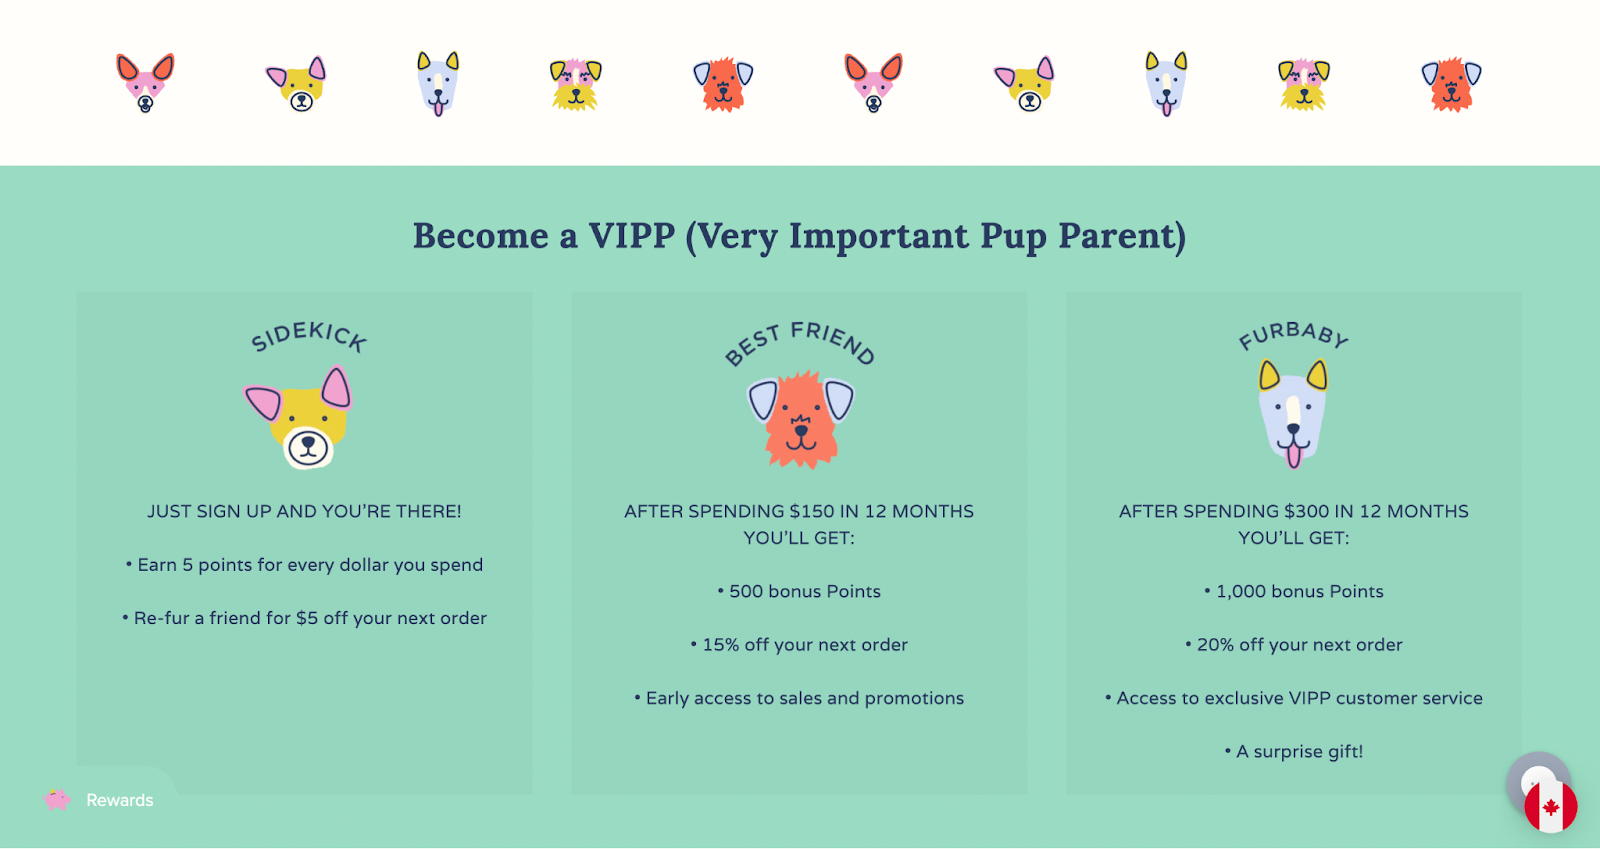 Lucy and Co.–A screenshot from Lucy and Co.'s rewards explainer page showing their 3 VIP tiers. The title is “Become a VIPP (Very Important Pup Parent”. There are three columns of text explaining each tier–Sidekick, Best Friend, and Furbaby. Sidekick reads, “Just sign up and you’re there! Earn 5 points for every dollar you spend. Re-fur a friend for $5 off your next order.” Best Friend reads, “After spending $150 in 12 months you’ll get: 500 bonus points. 15% off your next order. Early access to sales and promotions.” Furbaby reads, “After spending $300 in 12 months you’ll get: 1,000 bonus points. 20% off your next order. Access to exclusive VIPP customer service. A surprise gift!”. 